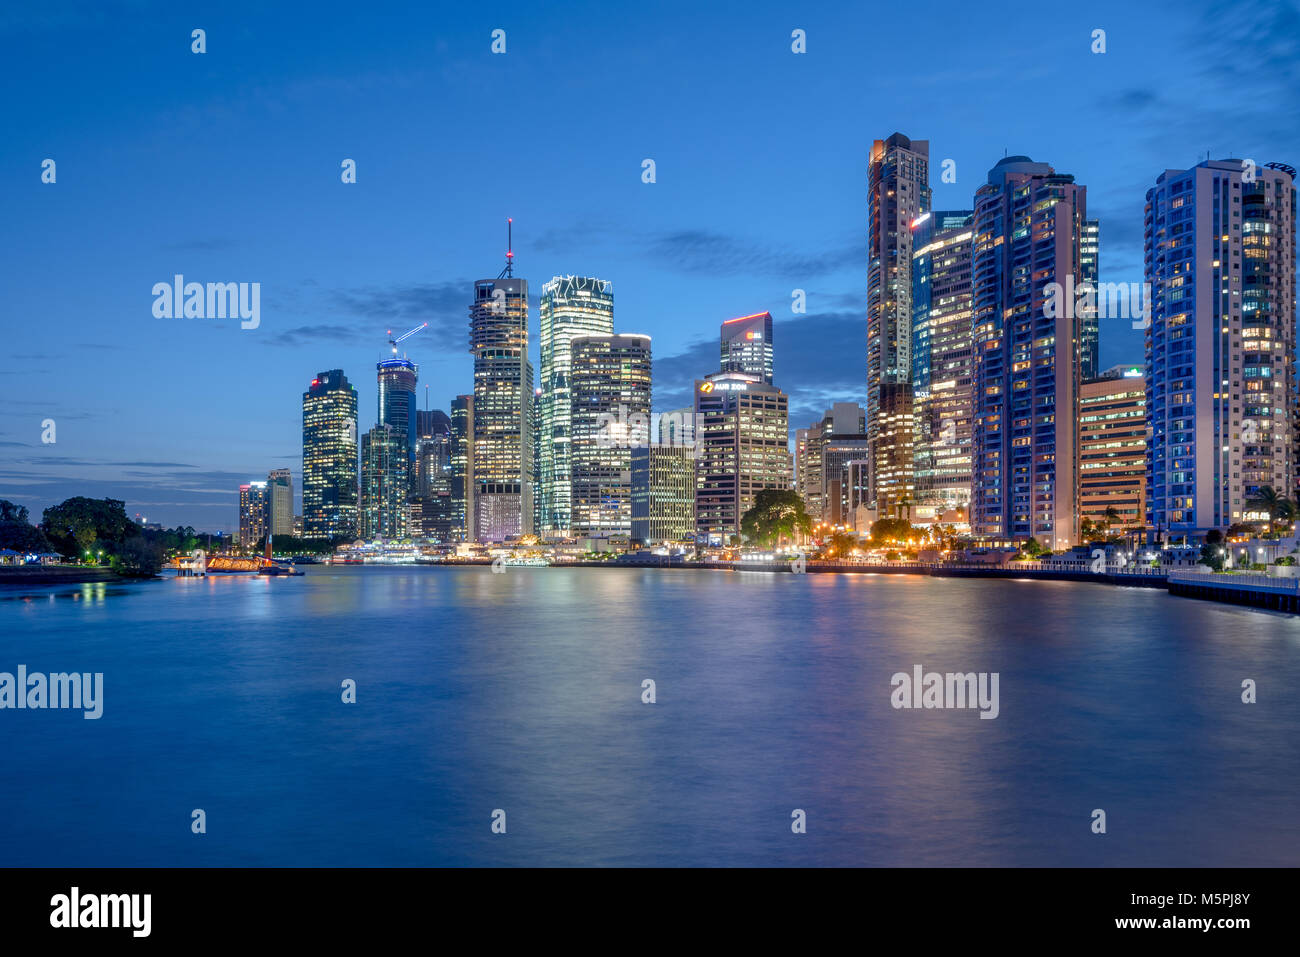 Night Brisbane, Queensland, Australia. Central Business District on banks of Brisbane River viewed at night Stock Photo